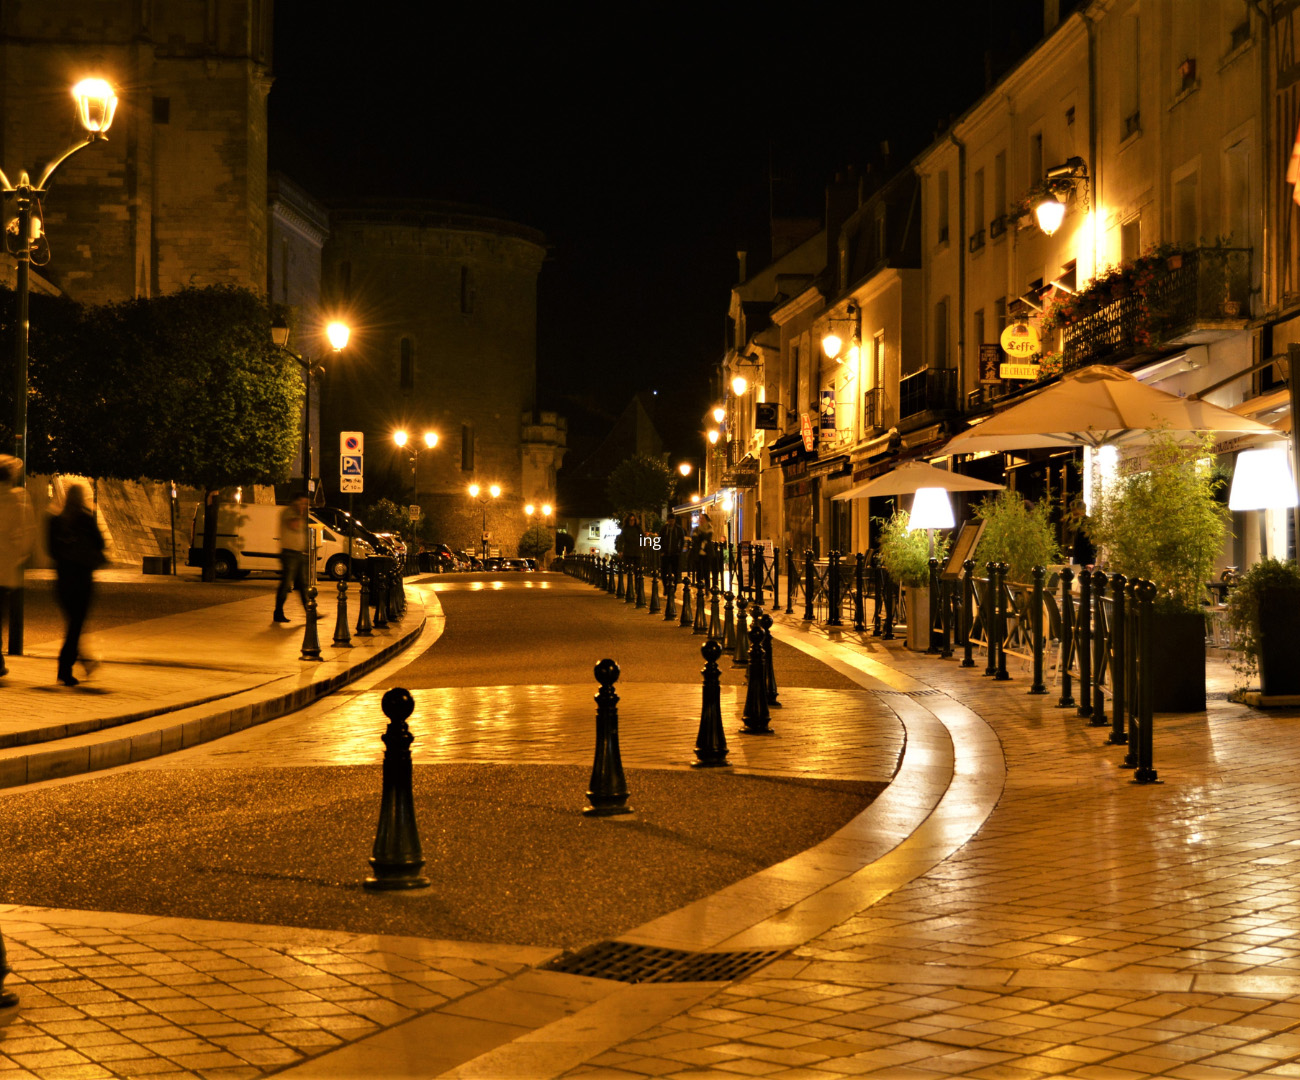 An image of a small town from the street at night